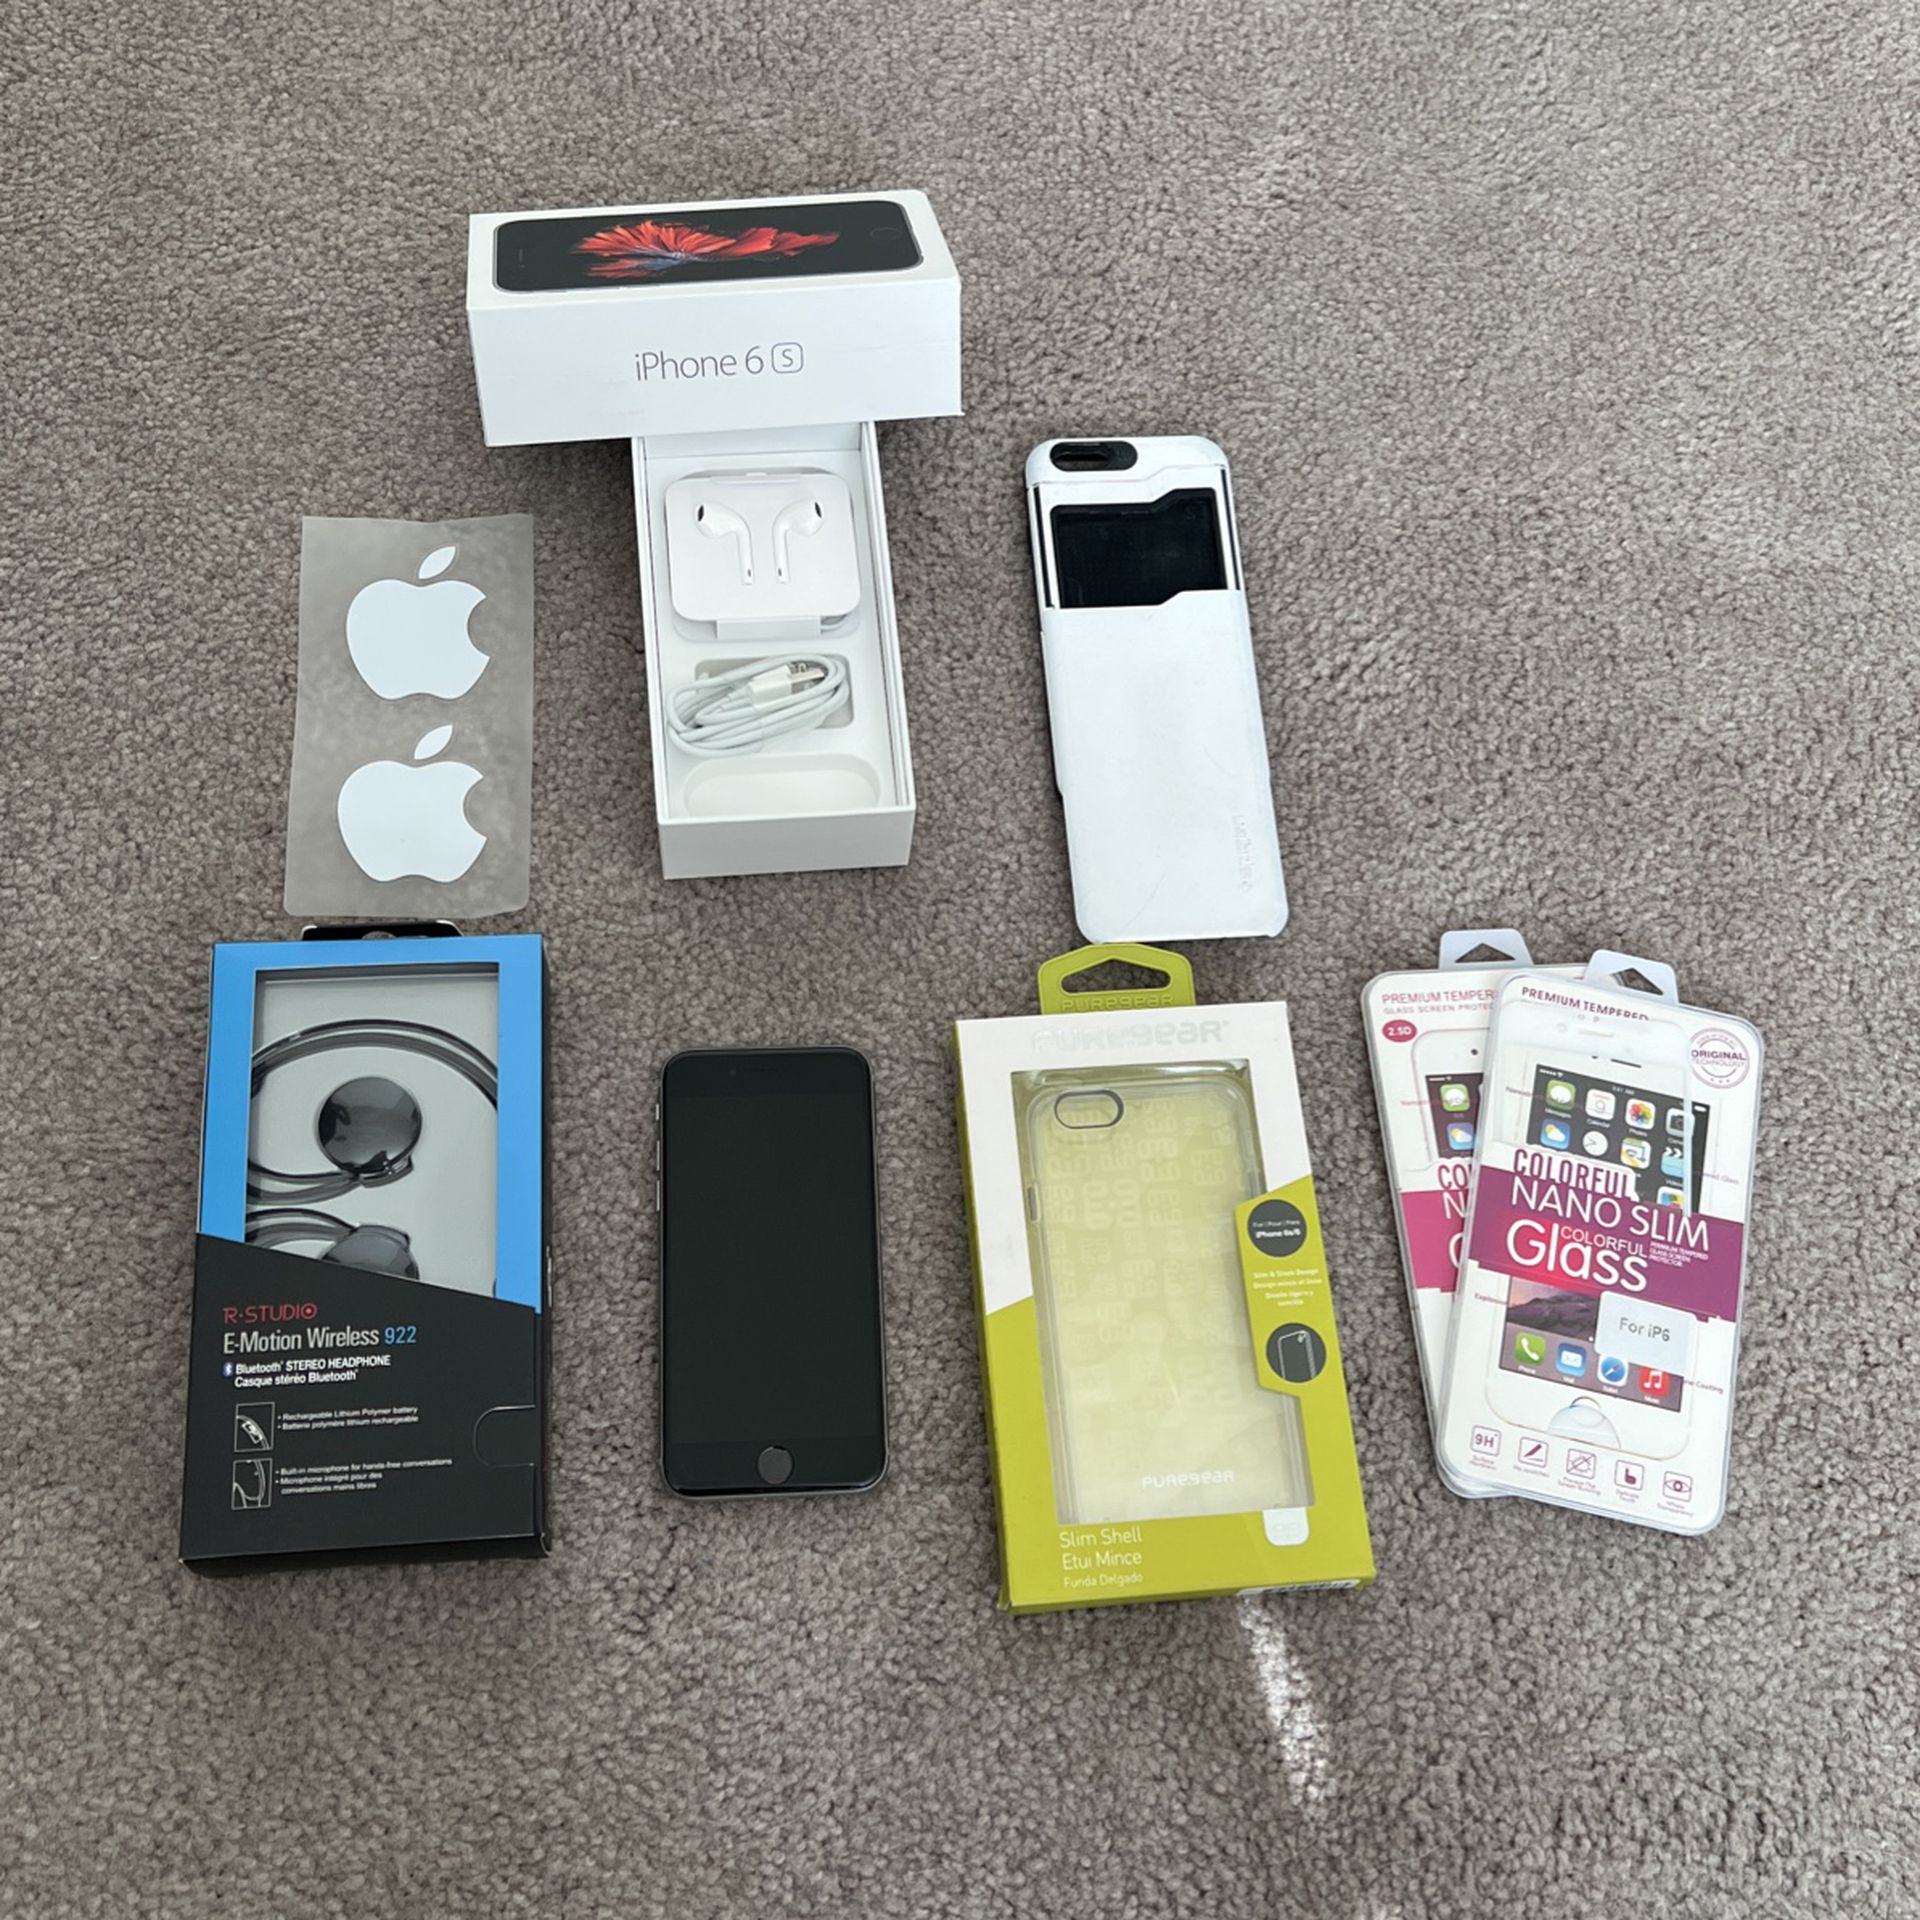 Apple iPhone 6s unlocked with free tempered glass and credit card case and headset